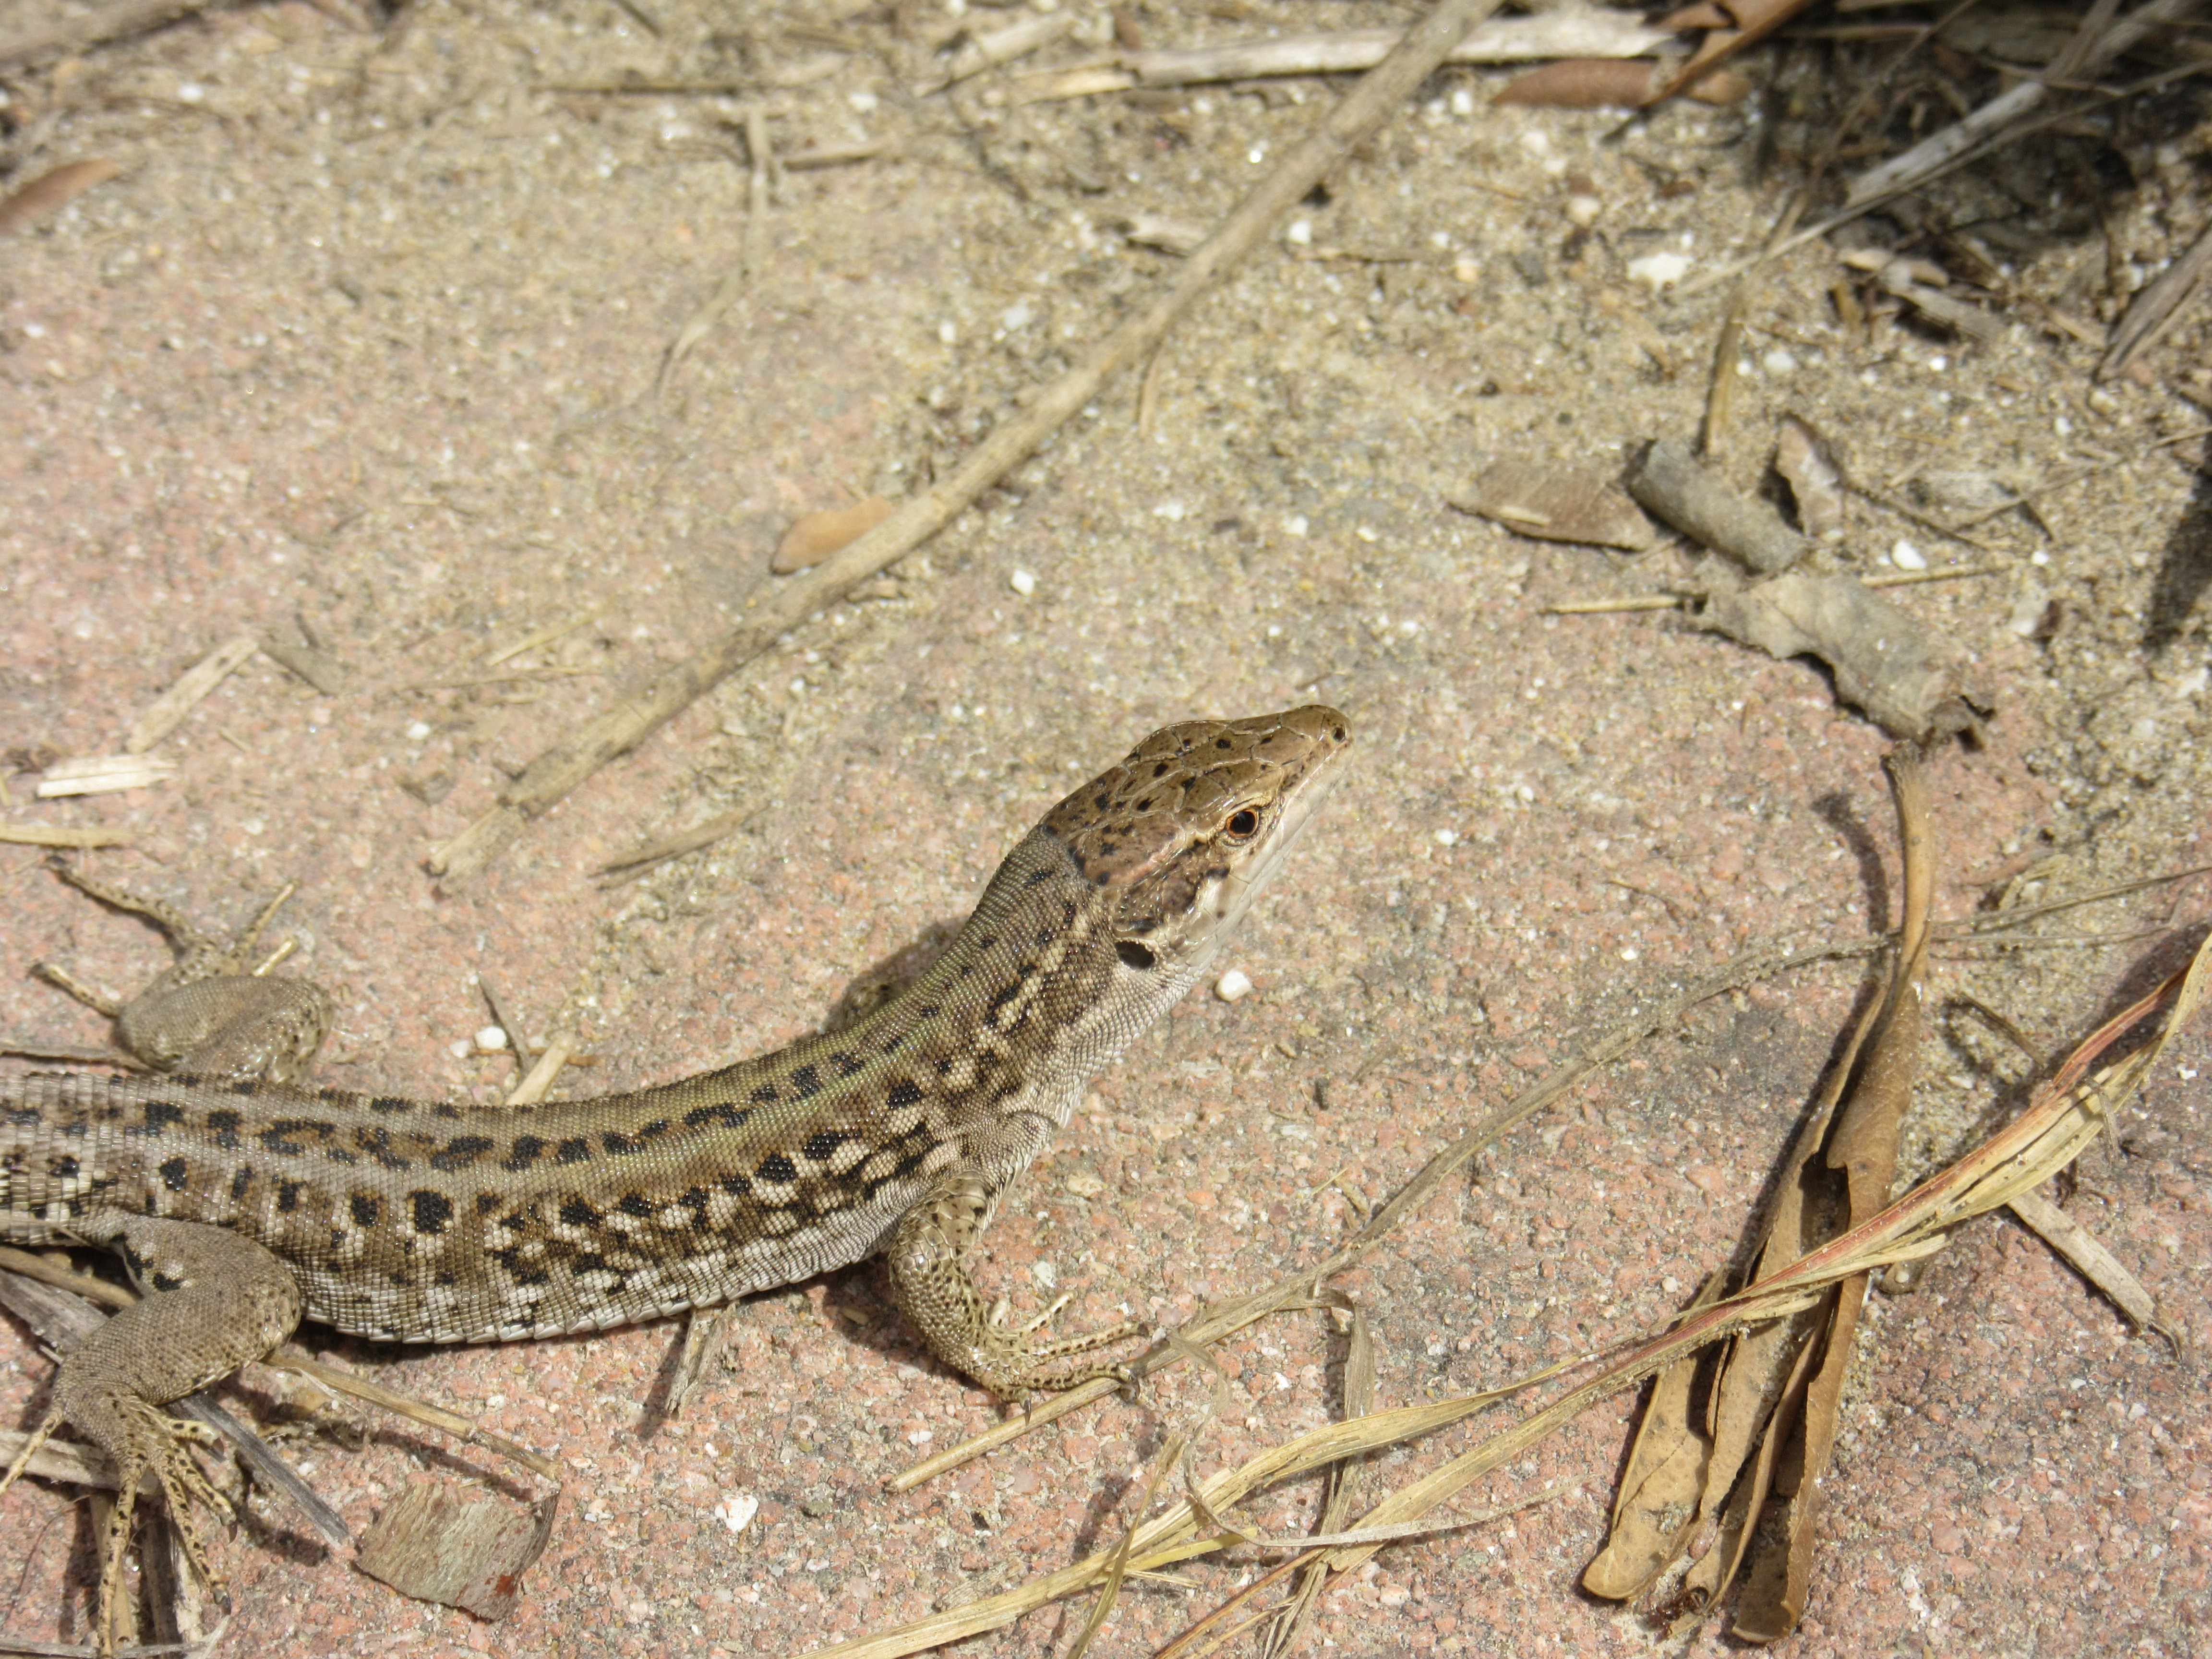 brown and gray lizard